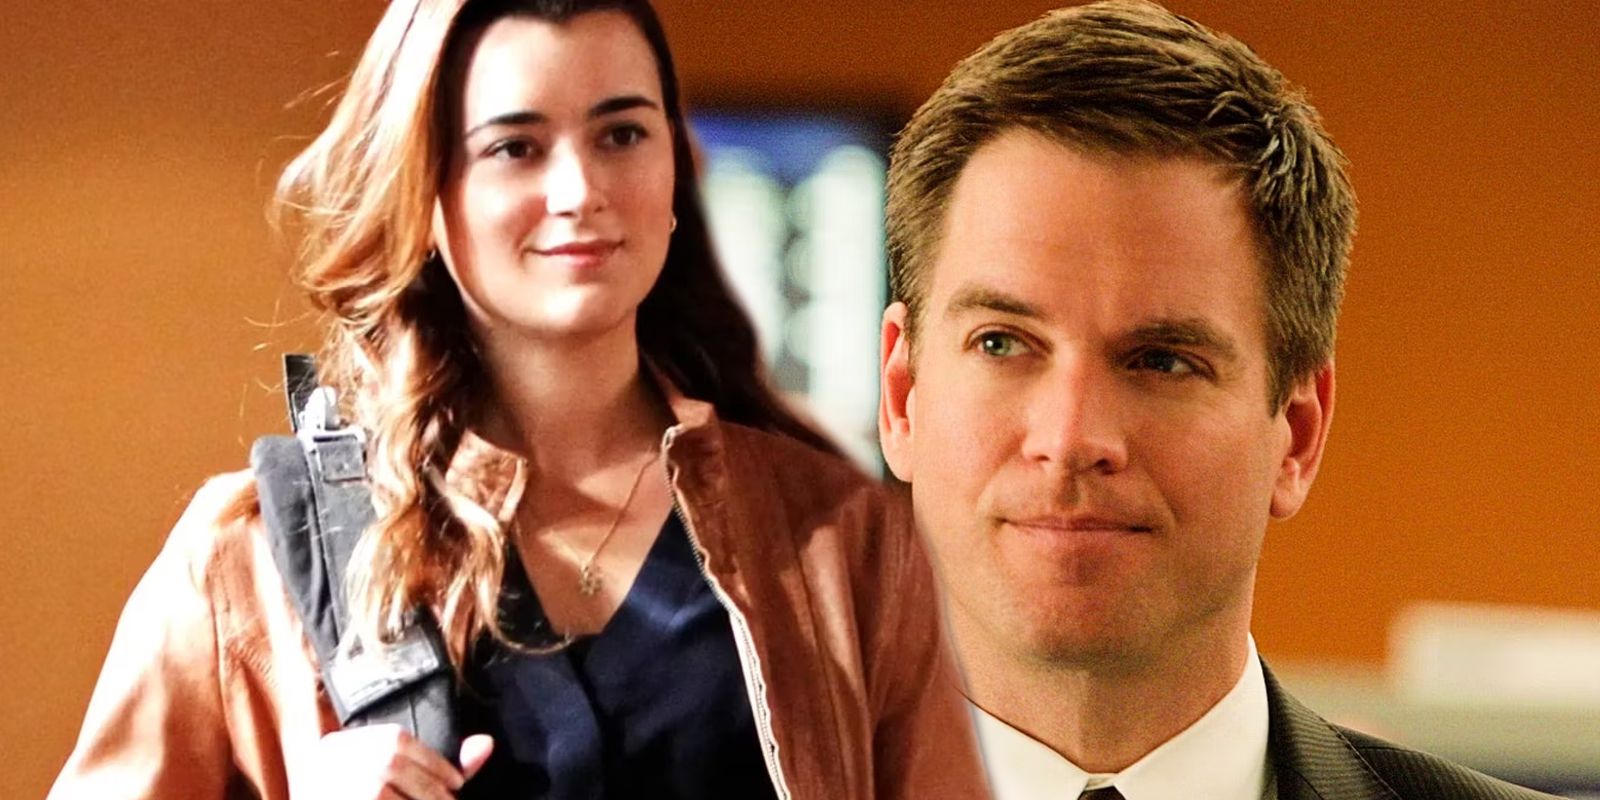 NCIS’ Tony & Ziva Spinoff Has 3 Exciting Firsts For The Franchise